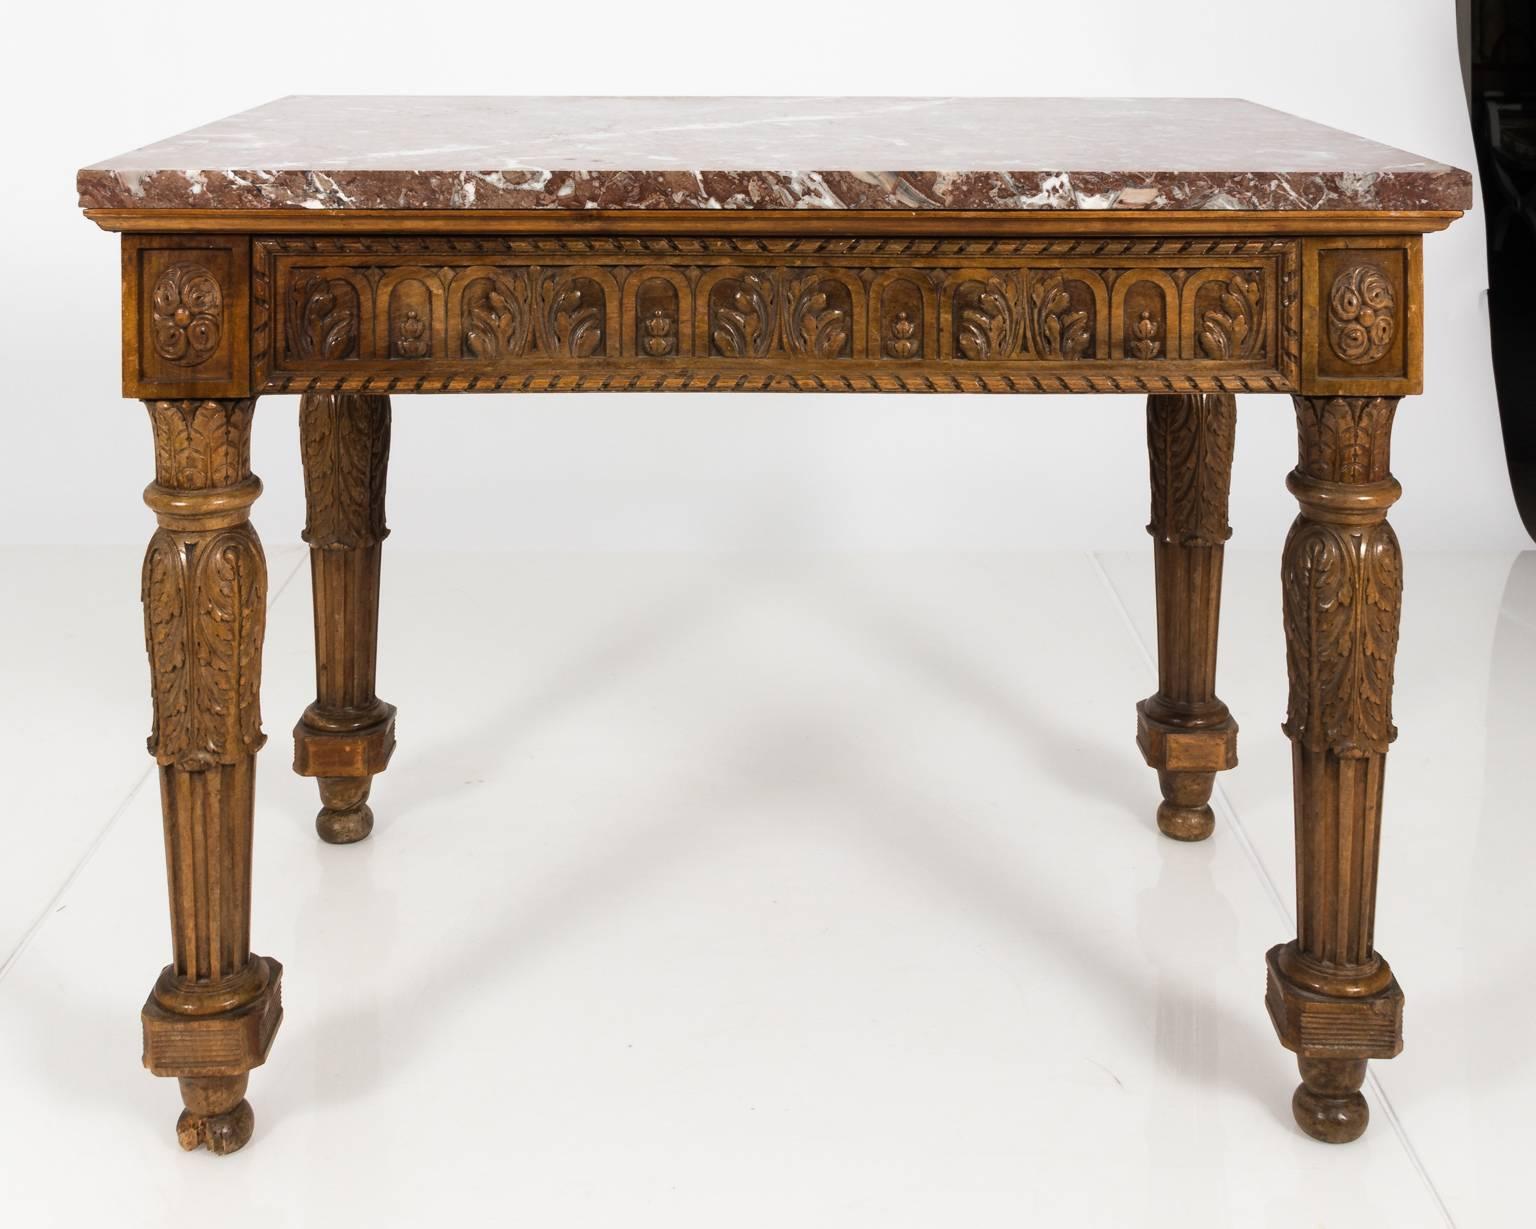 French carved wood console with Arabescato gray rose marble top and a decorative foliage skirt with turned block-and-ball feet, circa 19th century. Please note that one foot worn due to age.
 